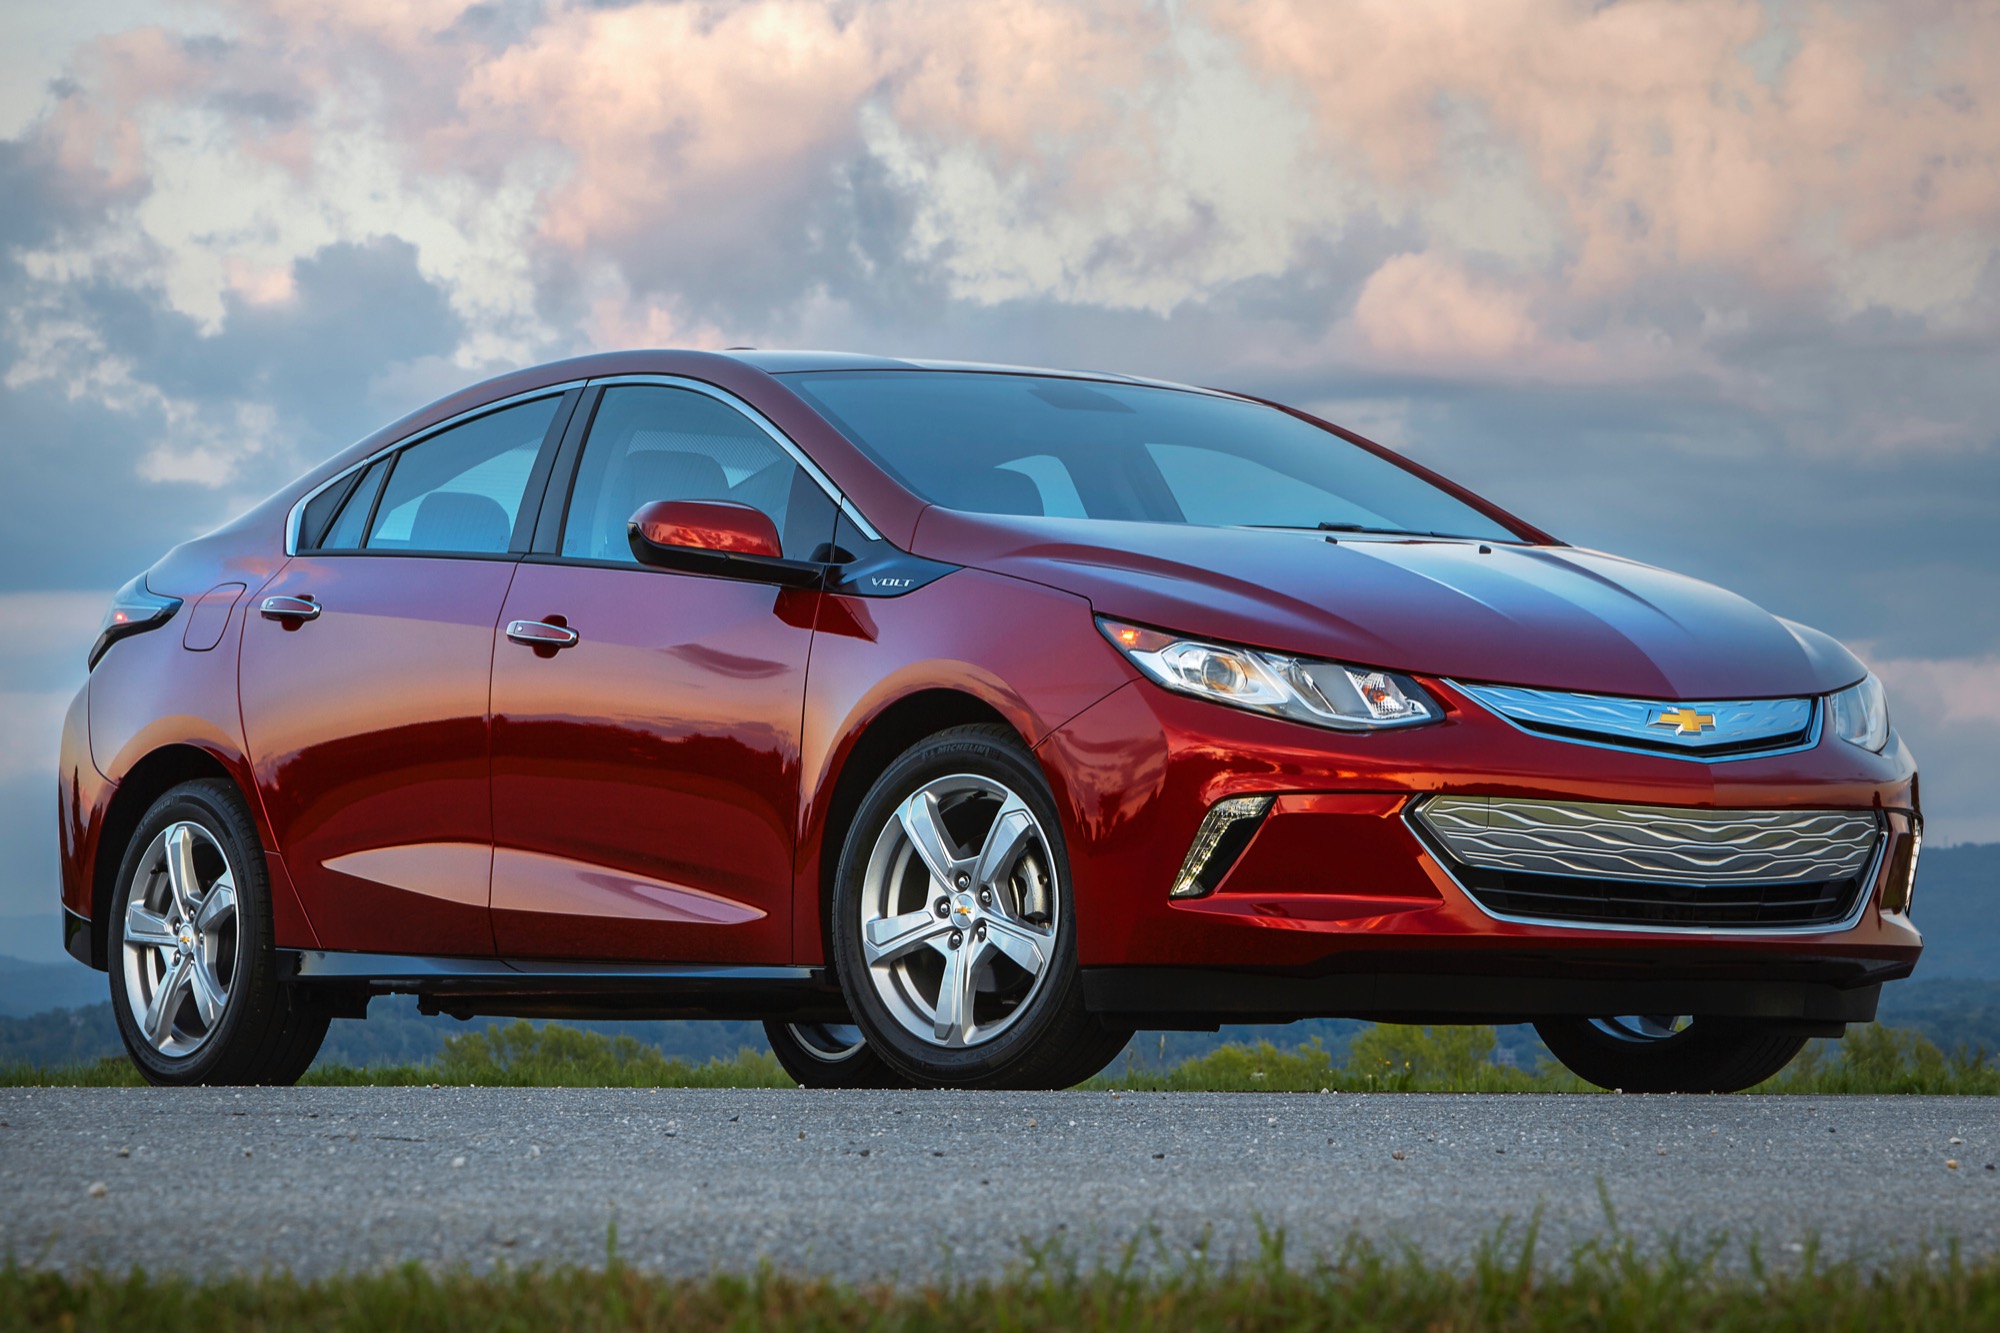 GM Sold 11 Units Of The Chevy Volt In Q2 2021